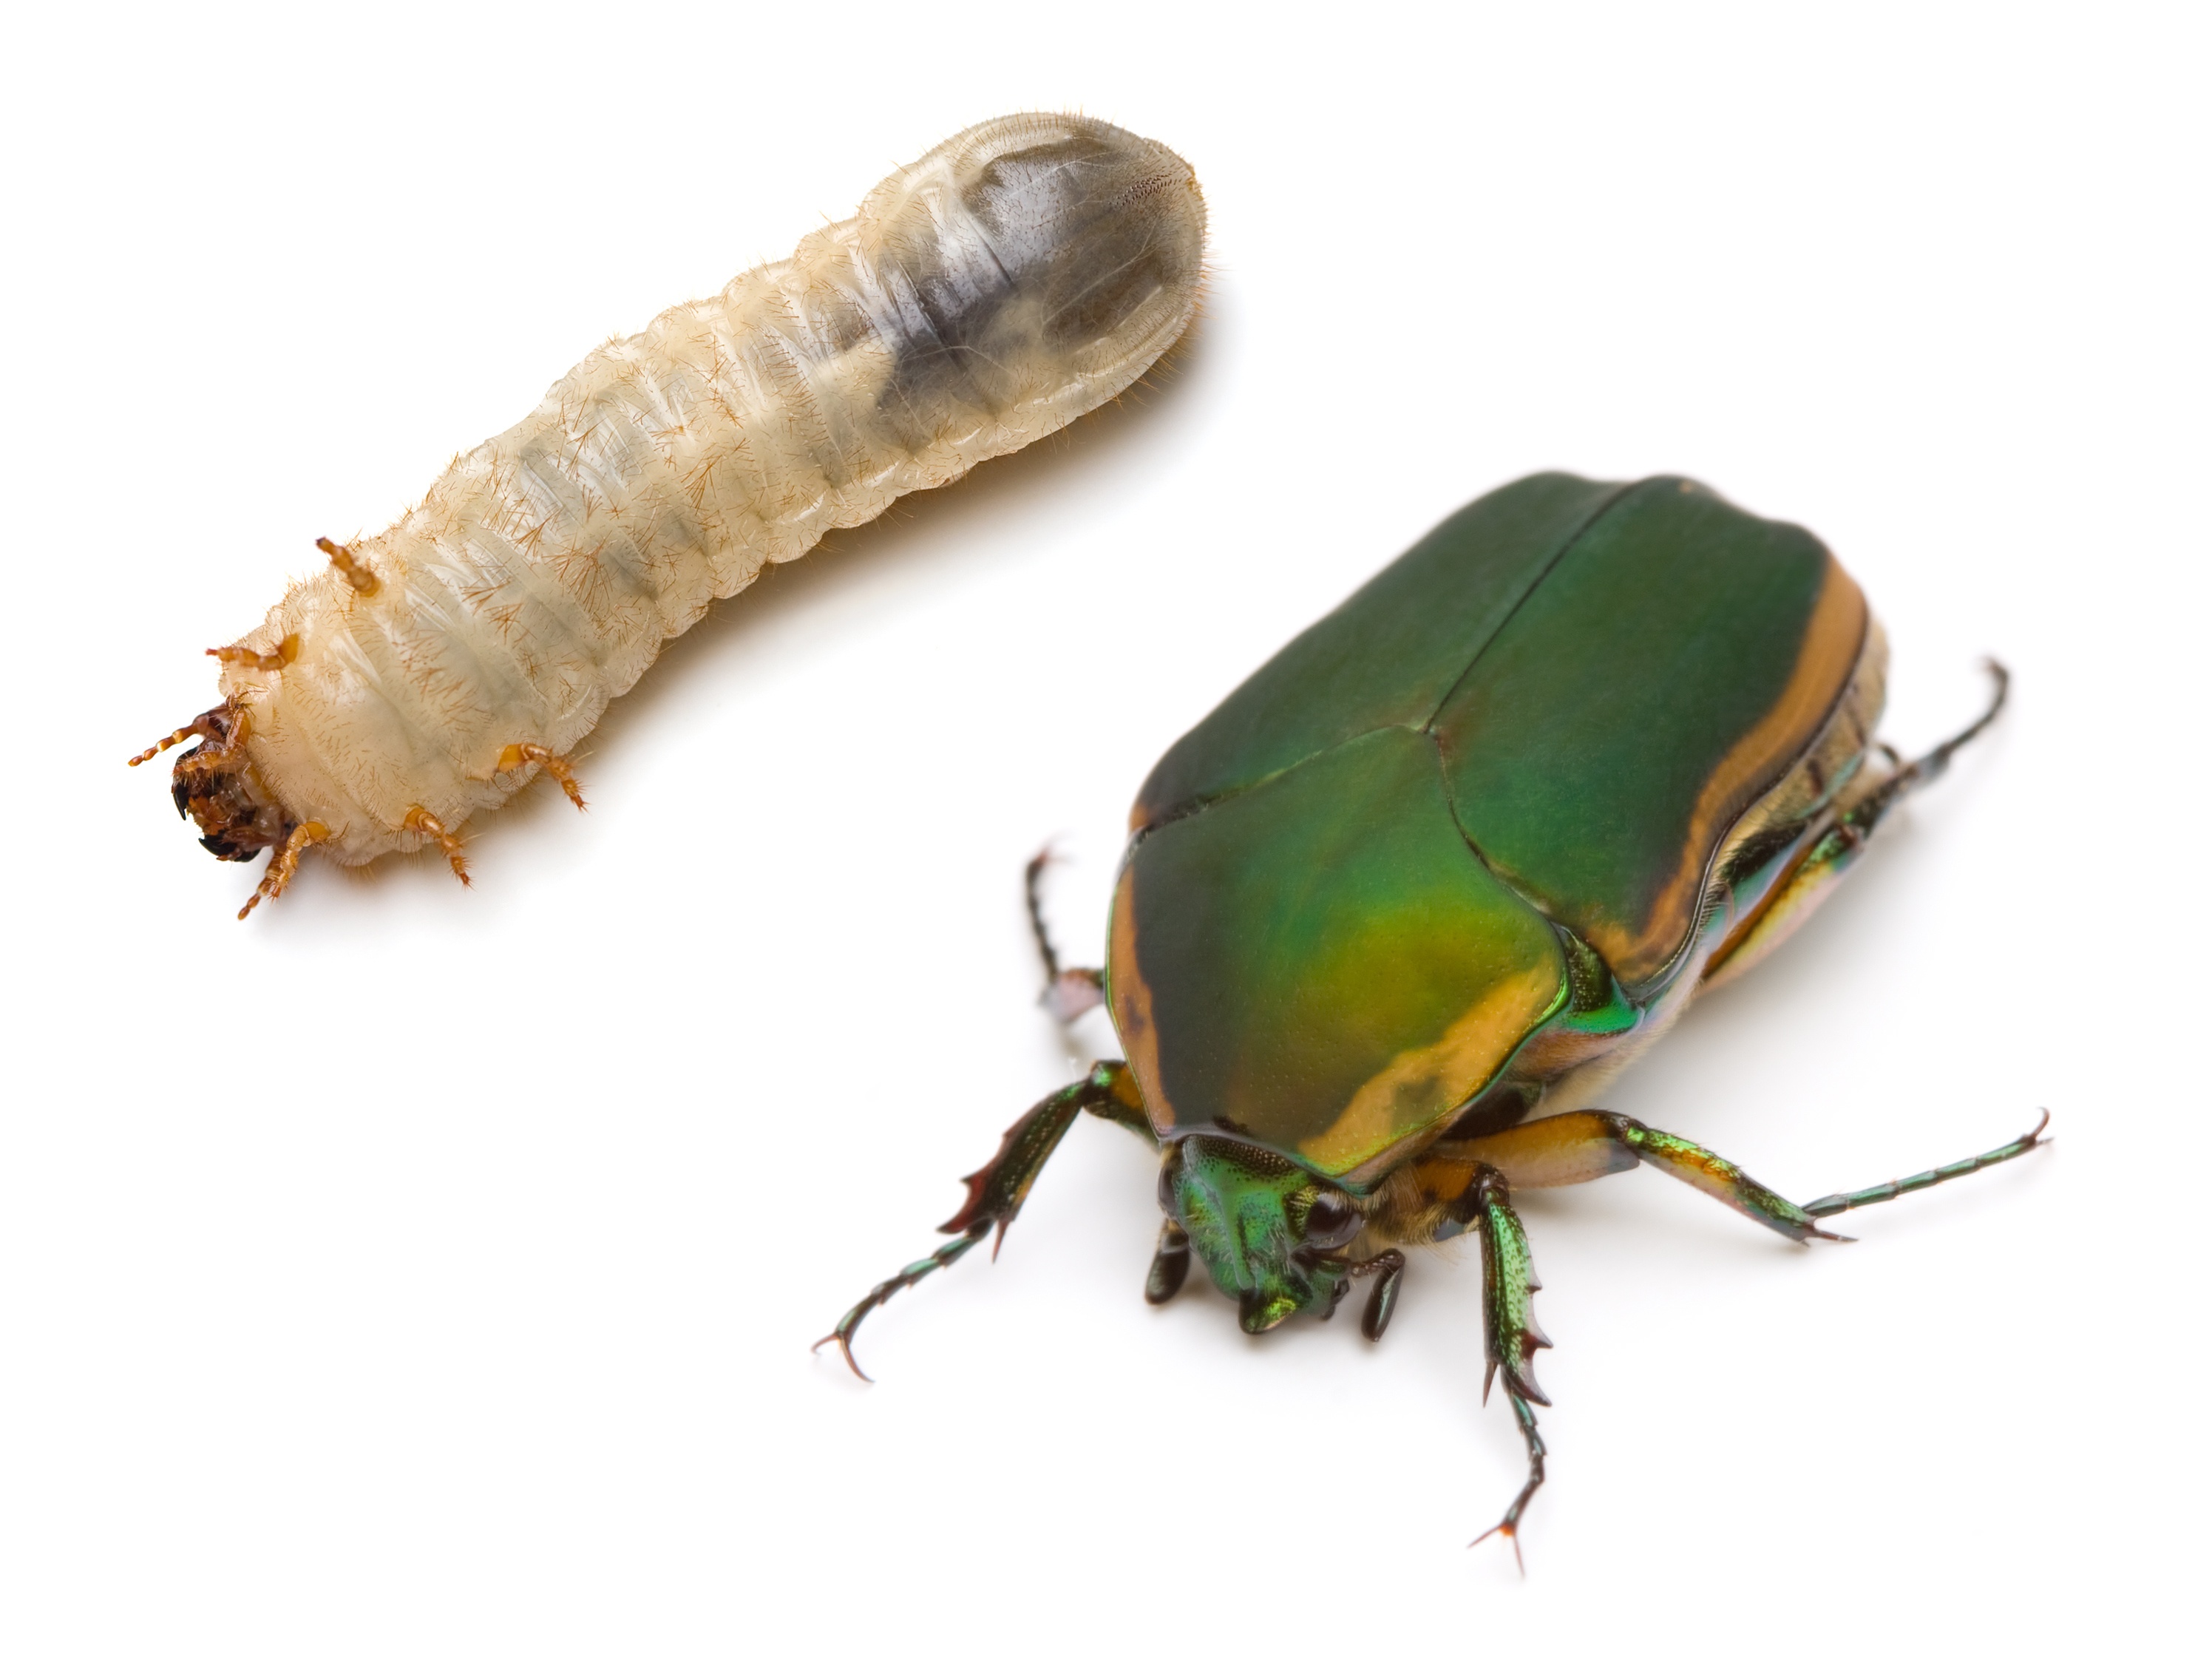 The Life Cycle of a June Bug